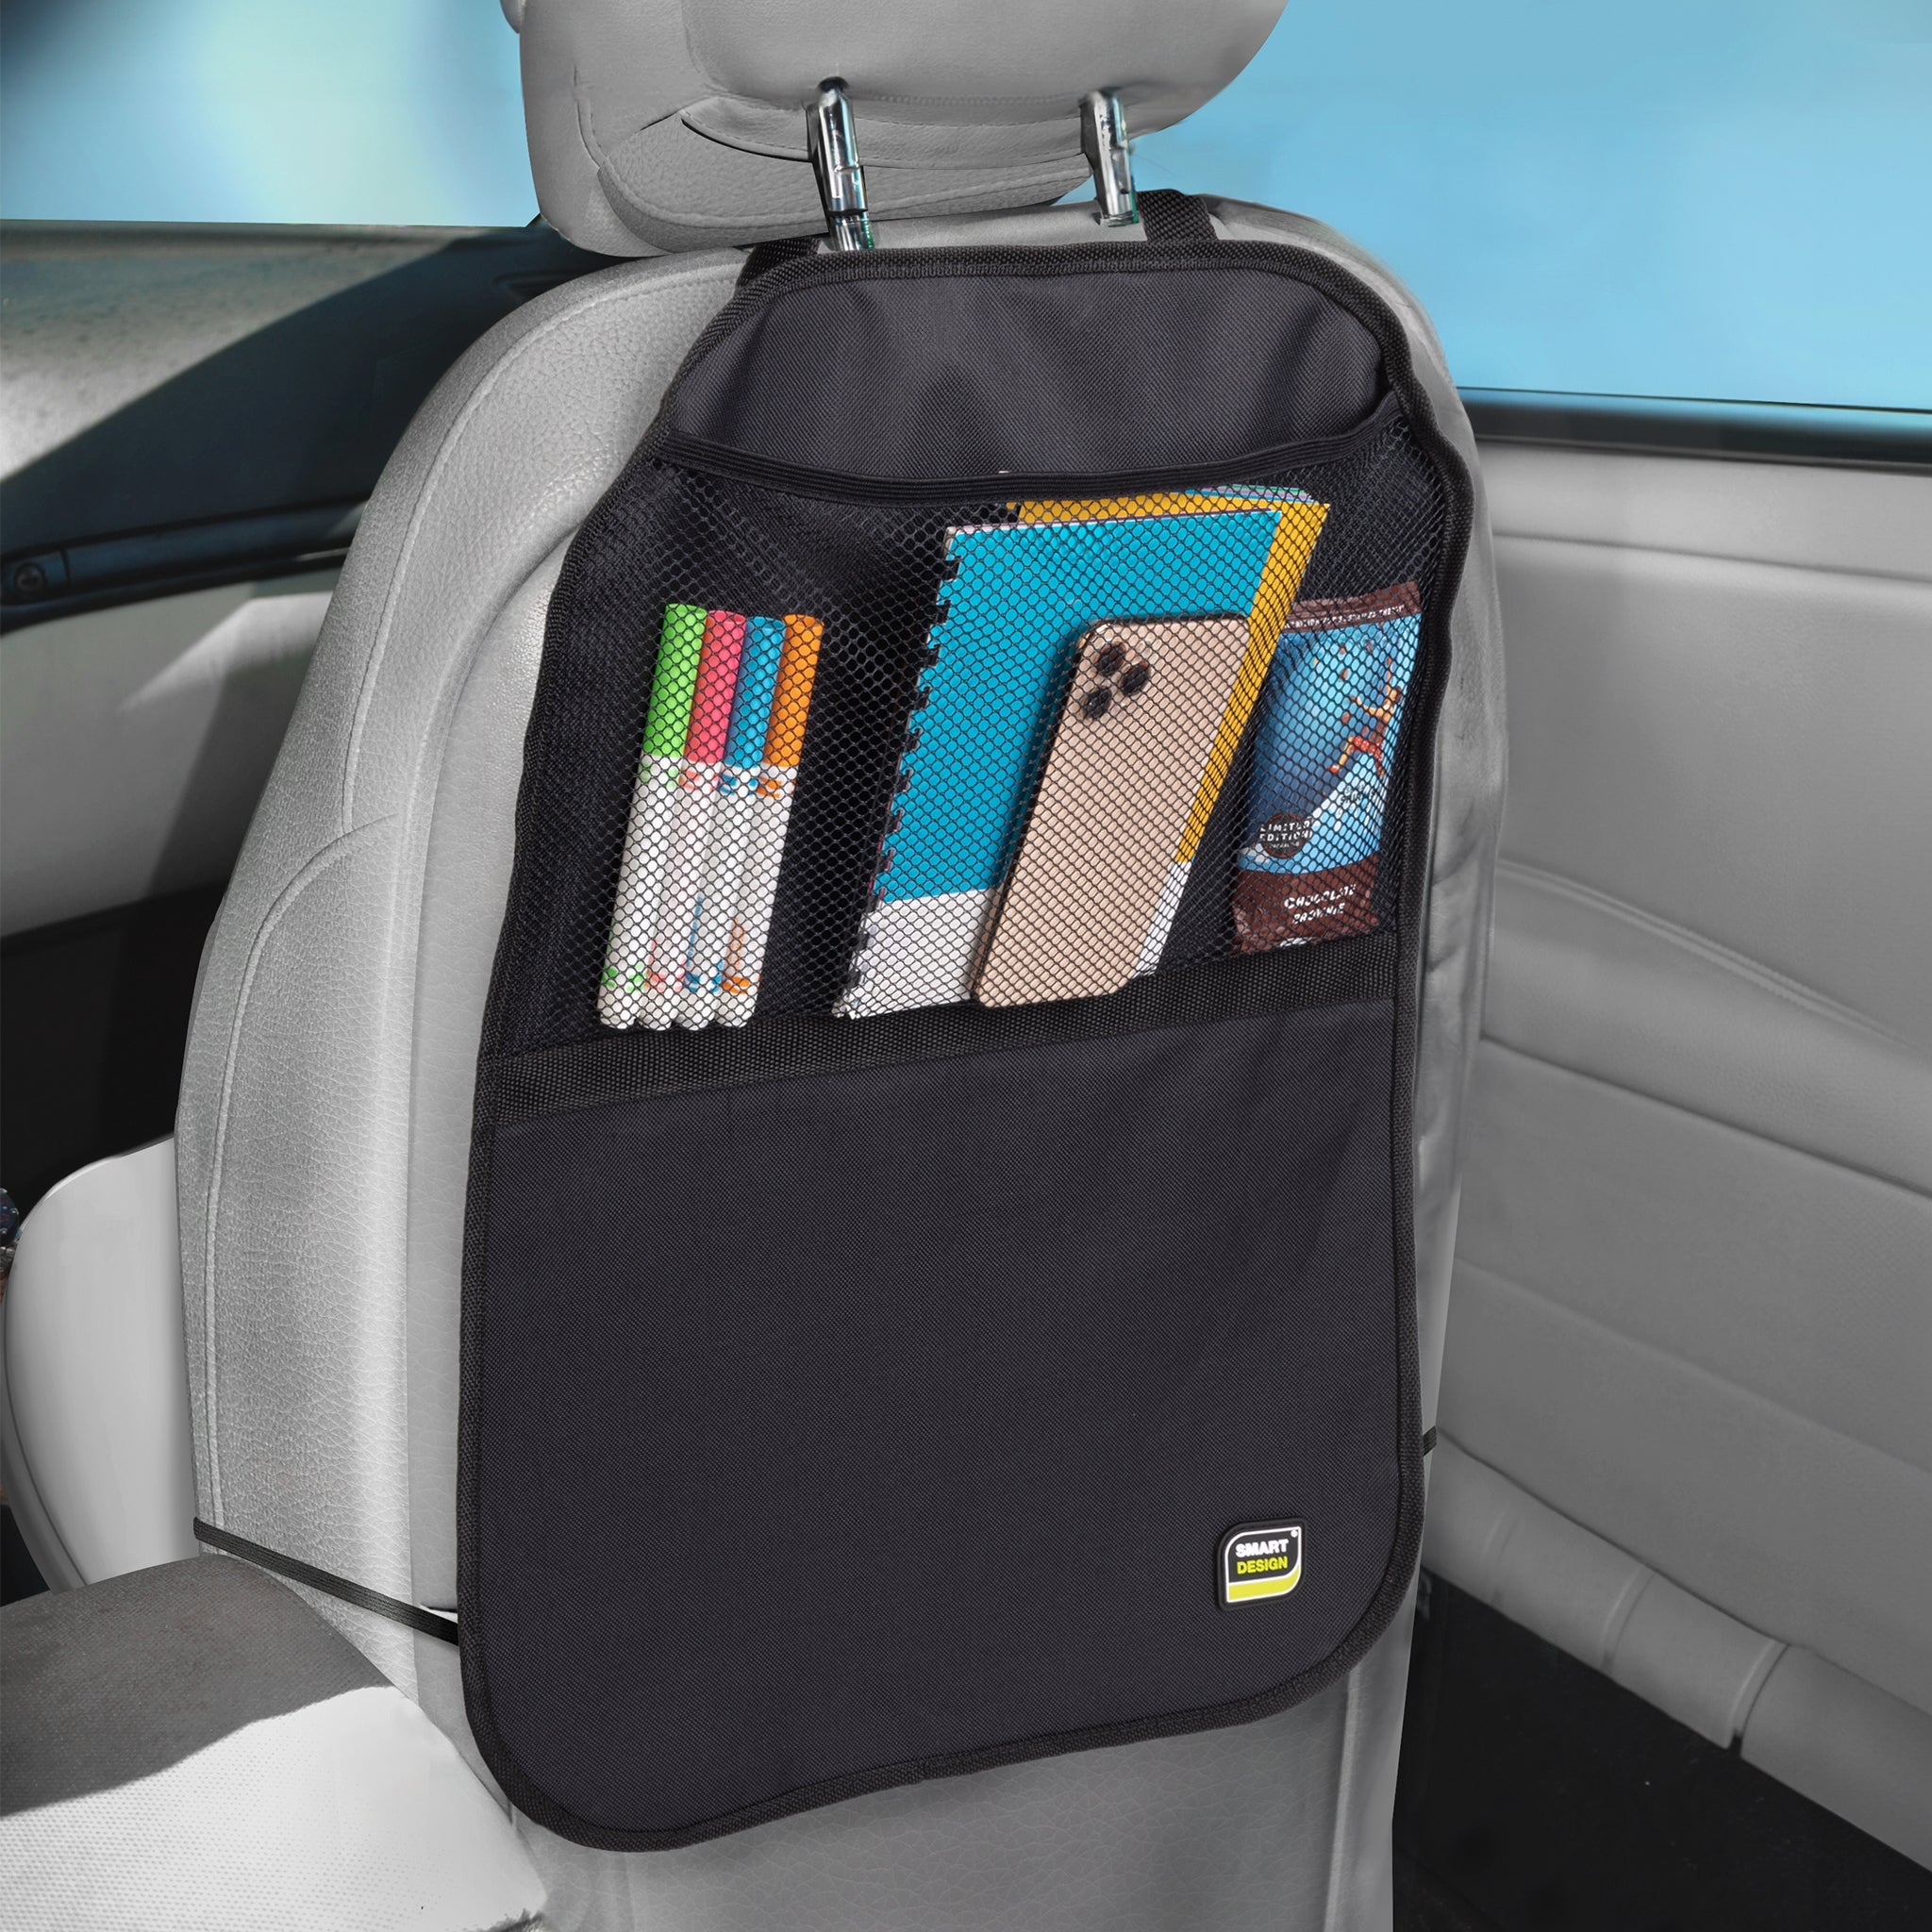 Car Backseat Protector Cover and Storage with Kick Mat - Black - Smart Design® 3